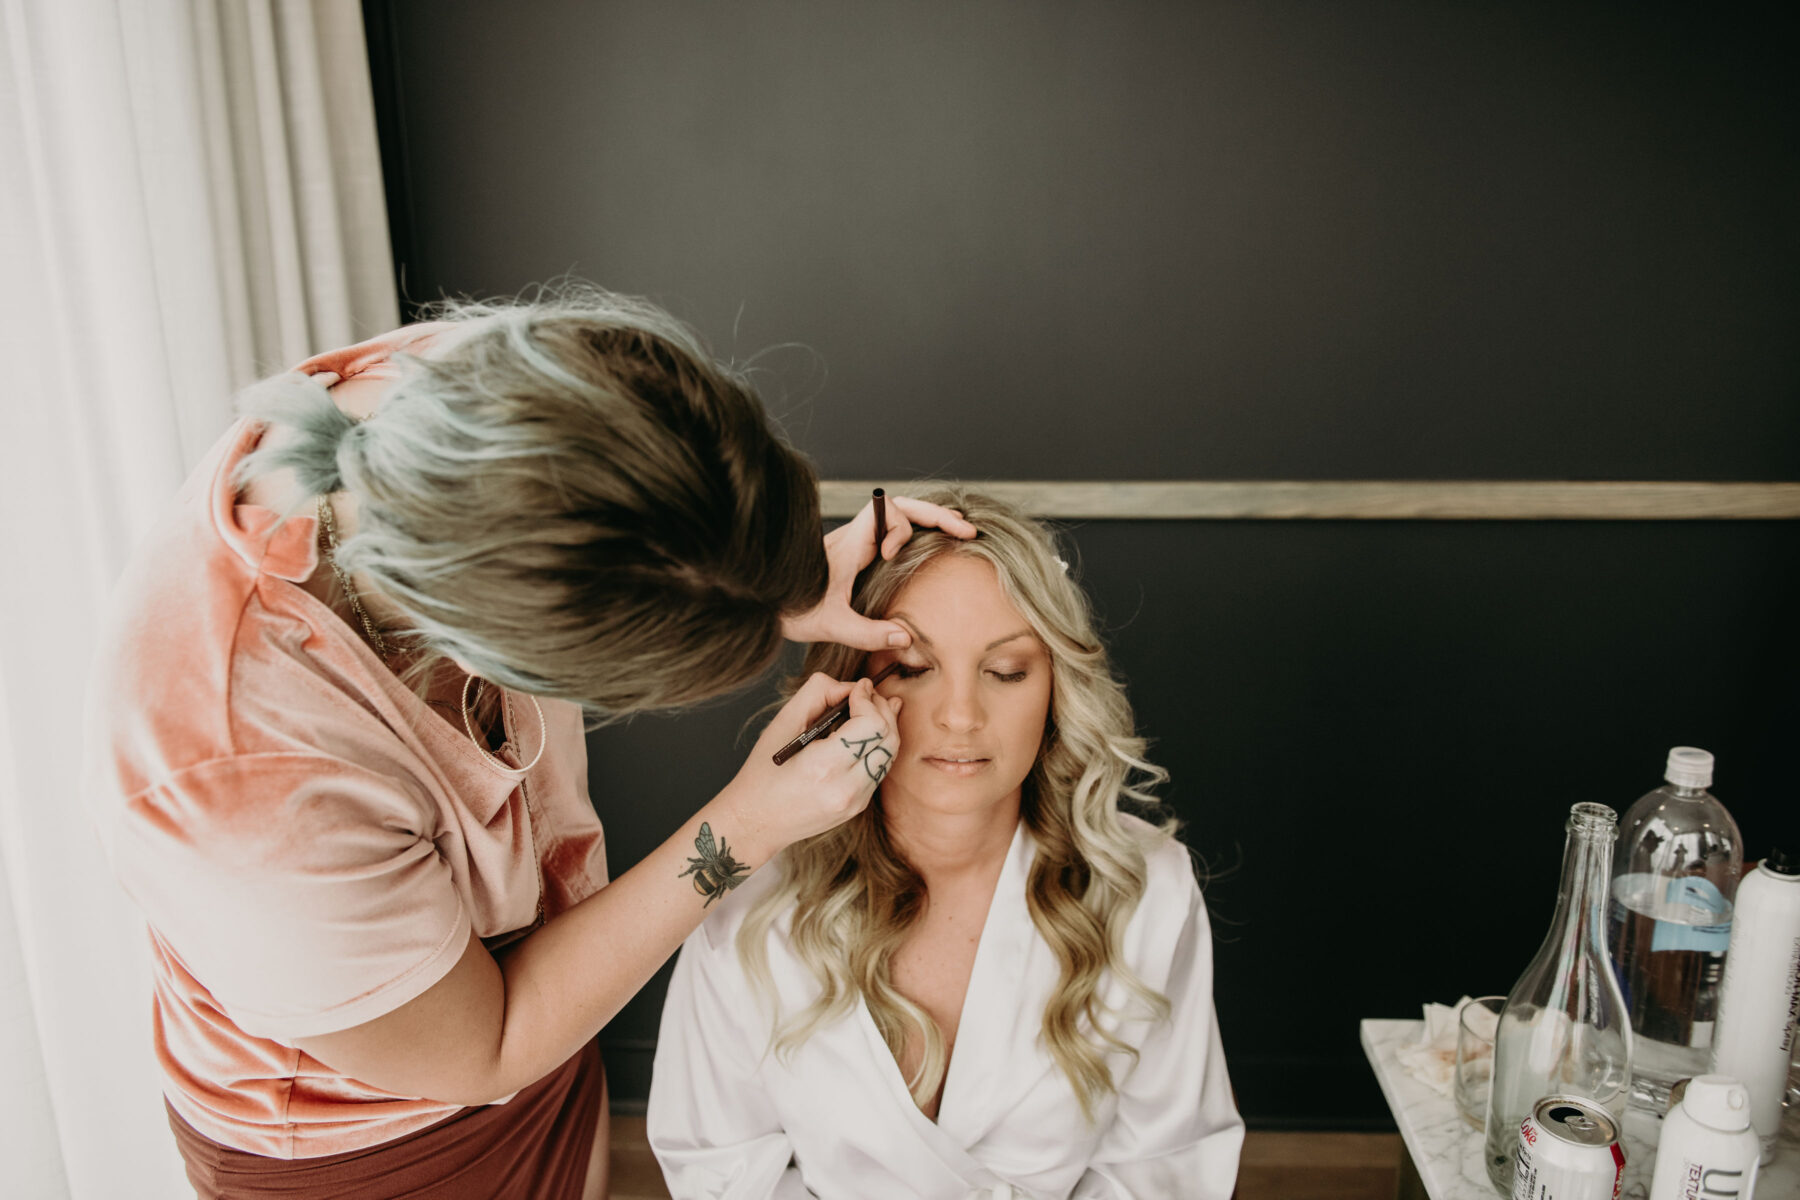 Wedding hair and makeup: Summer Tennessee Wedding at Noelle from Jayde J. Smith Events featured on Nashville Bride Guide